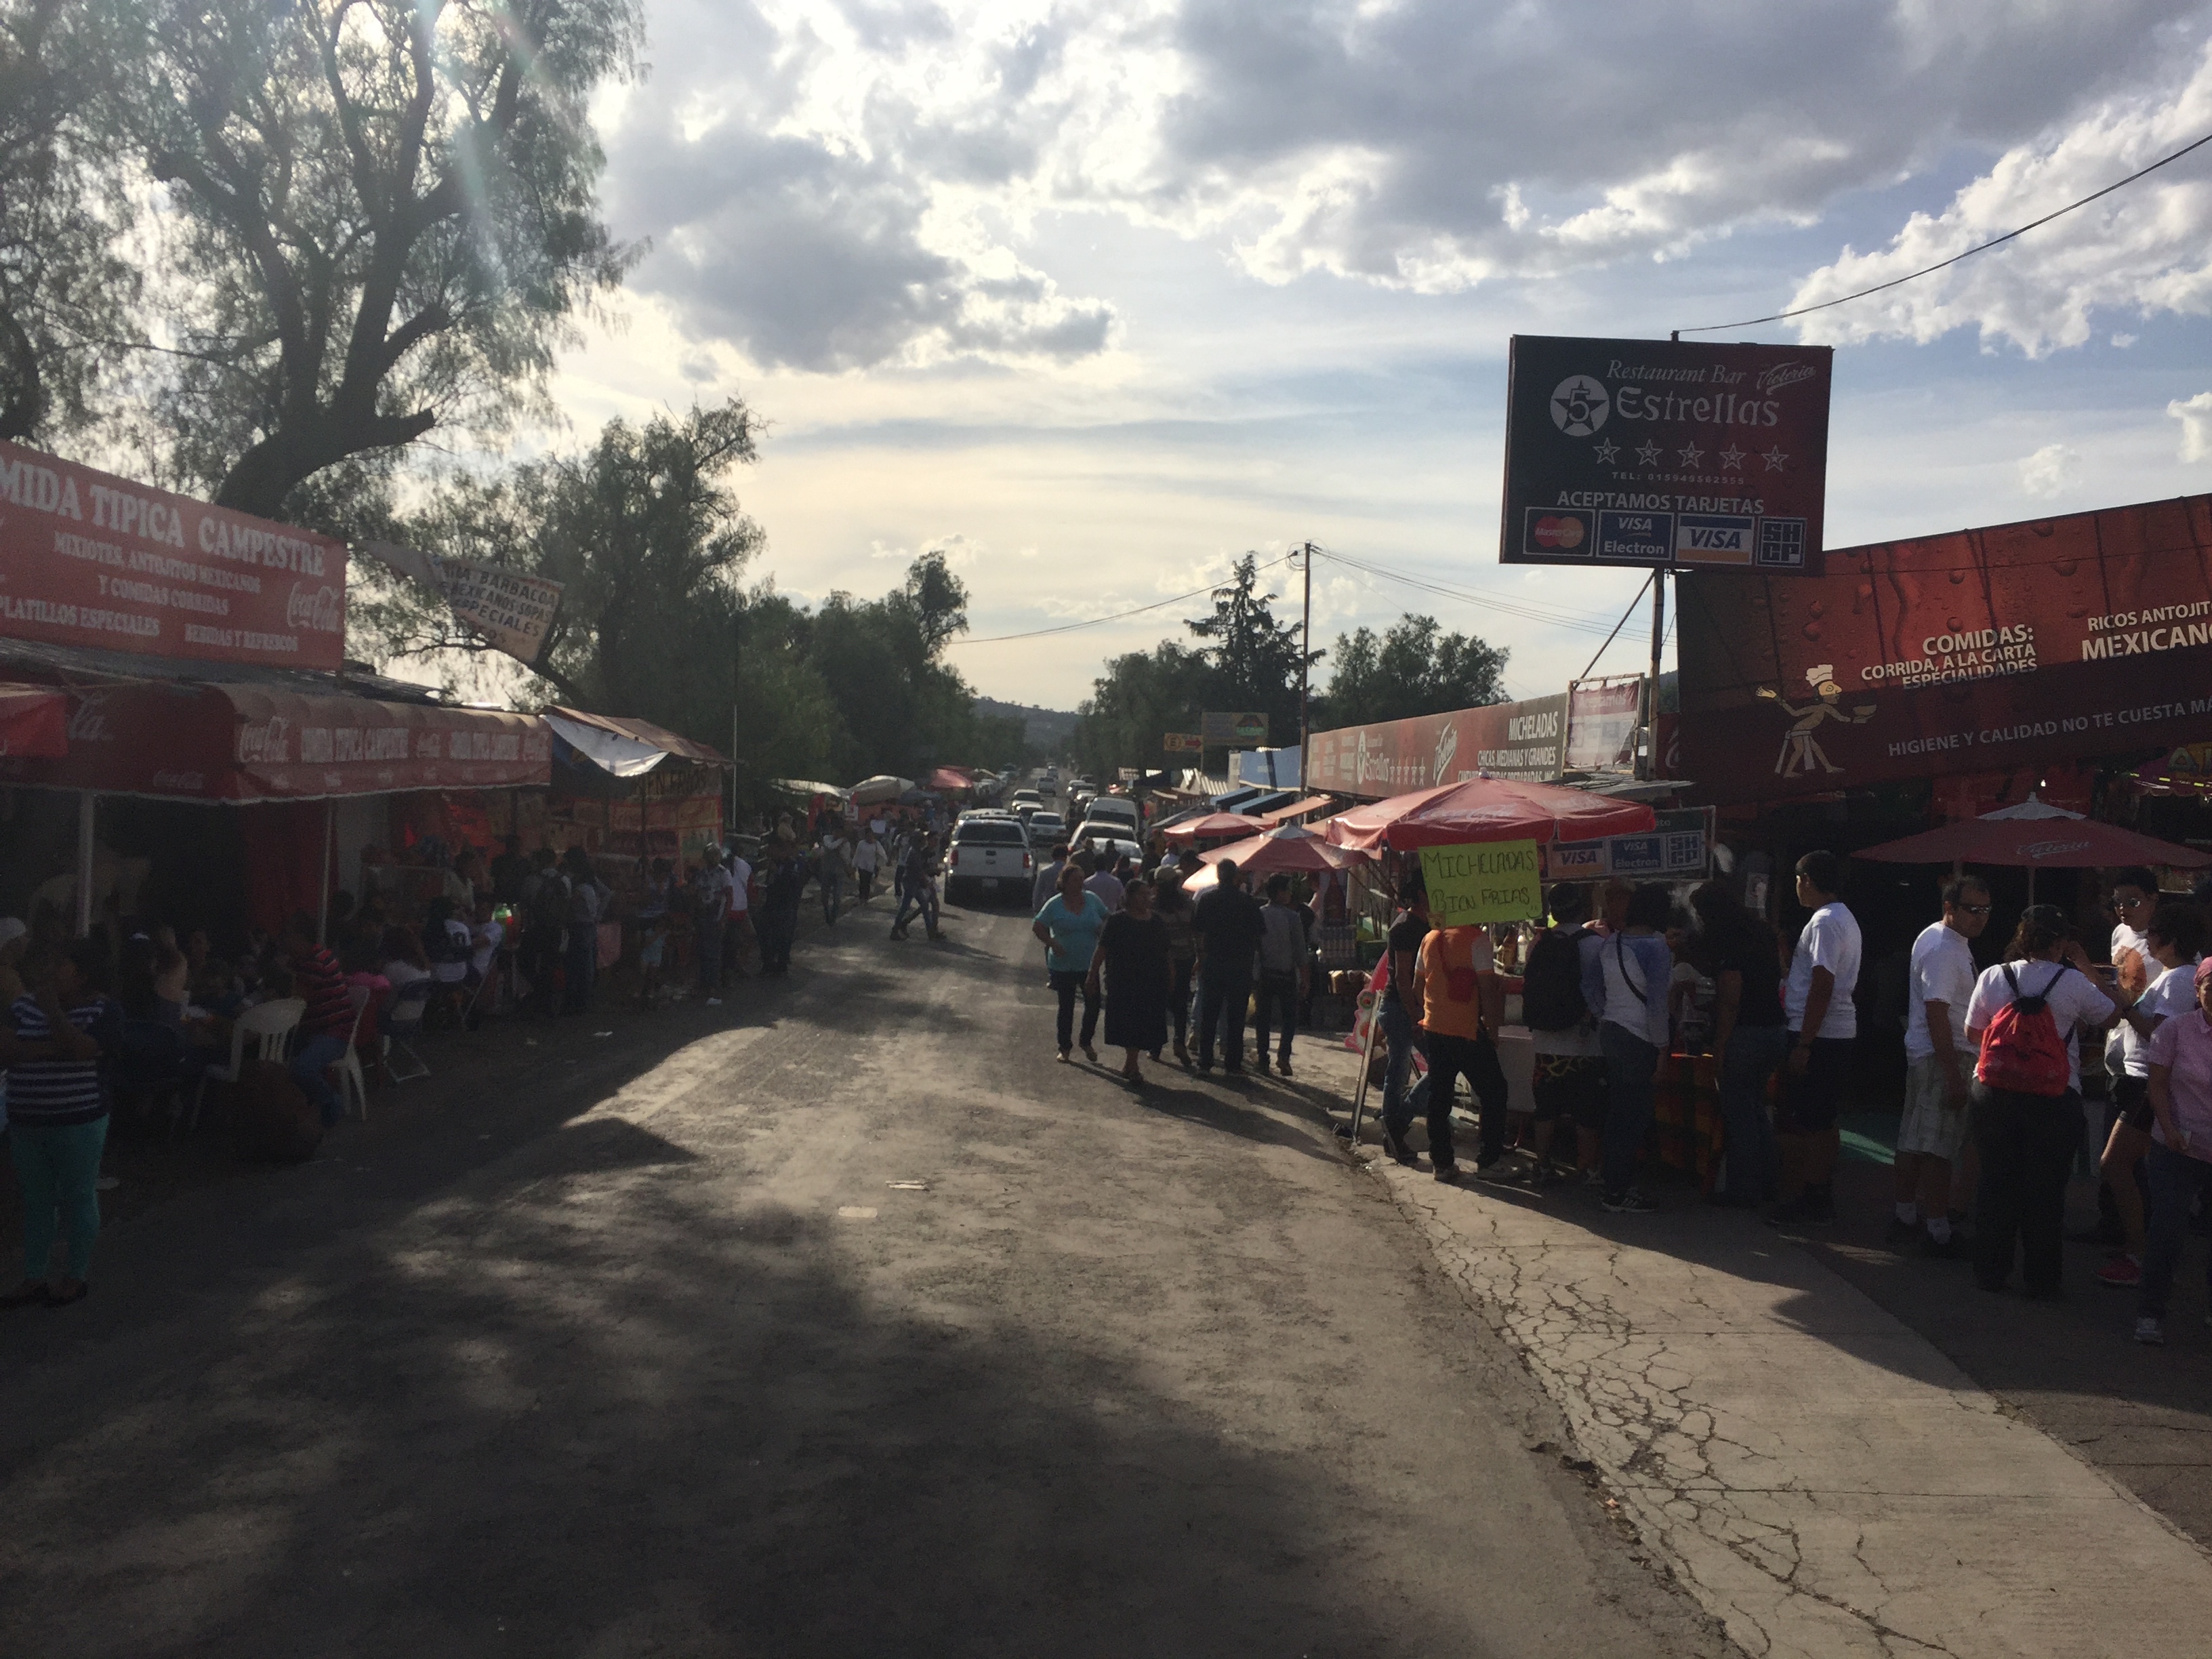 People eat at food carts in Teotihuacan, Mexico.